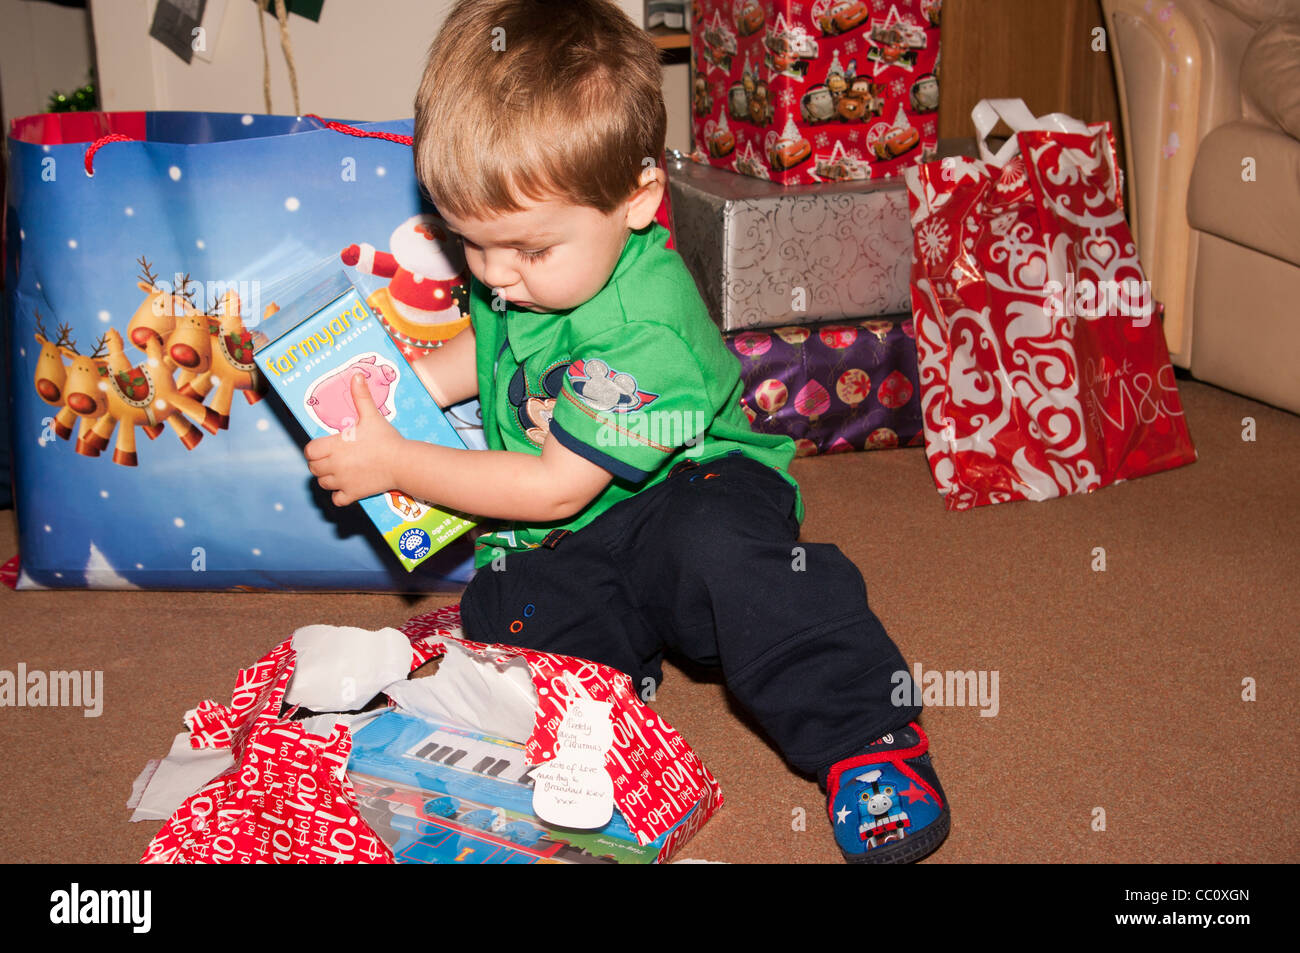 xmas present for 2 year old boy